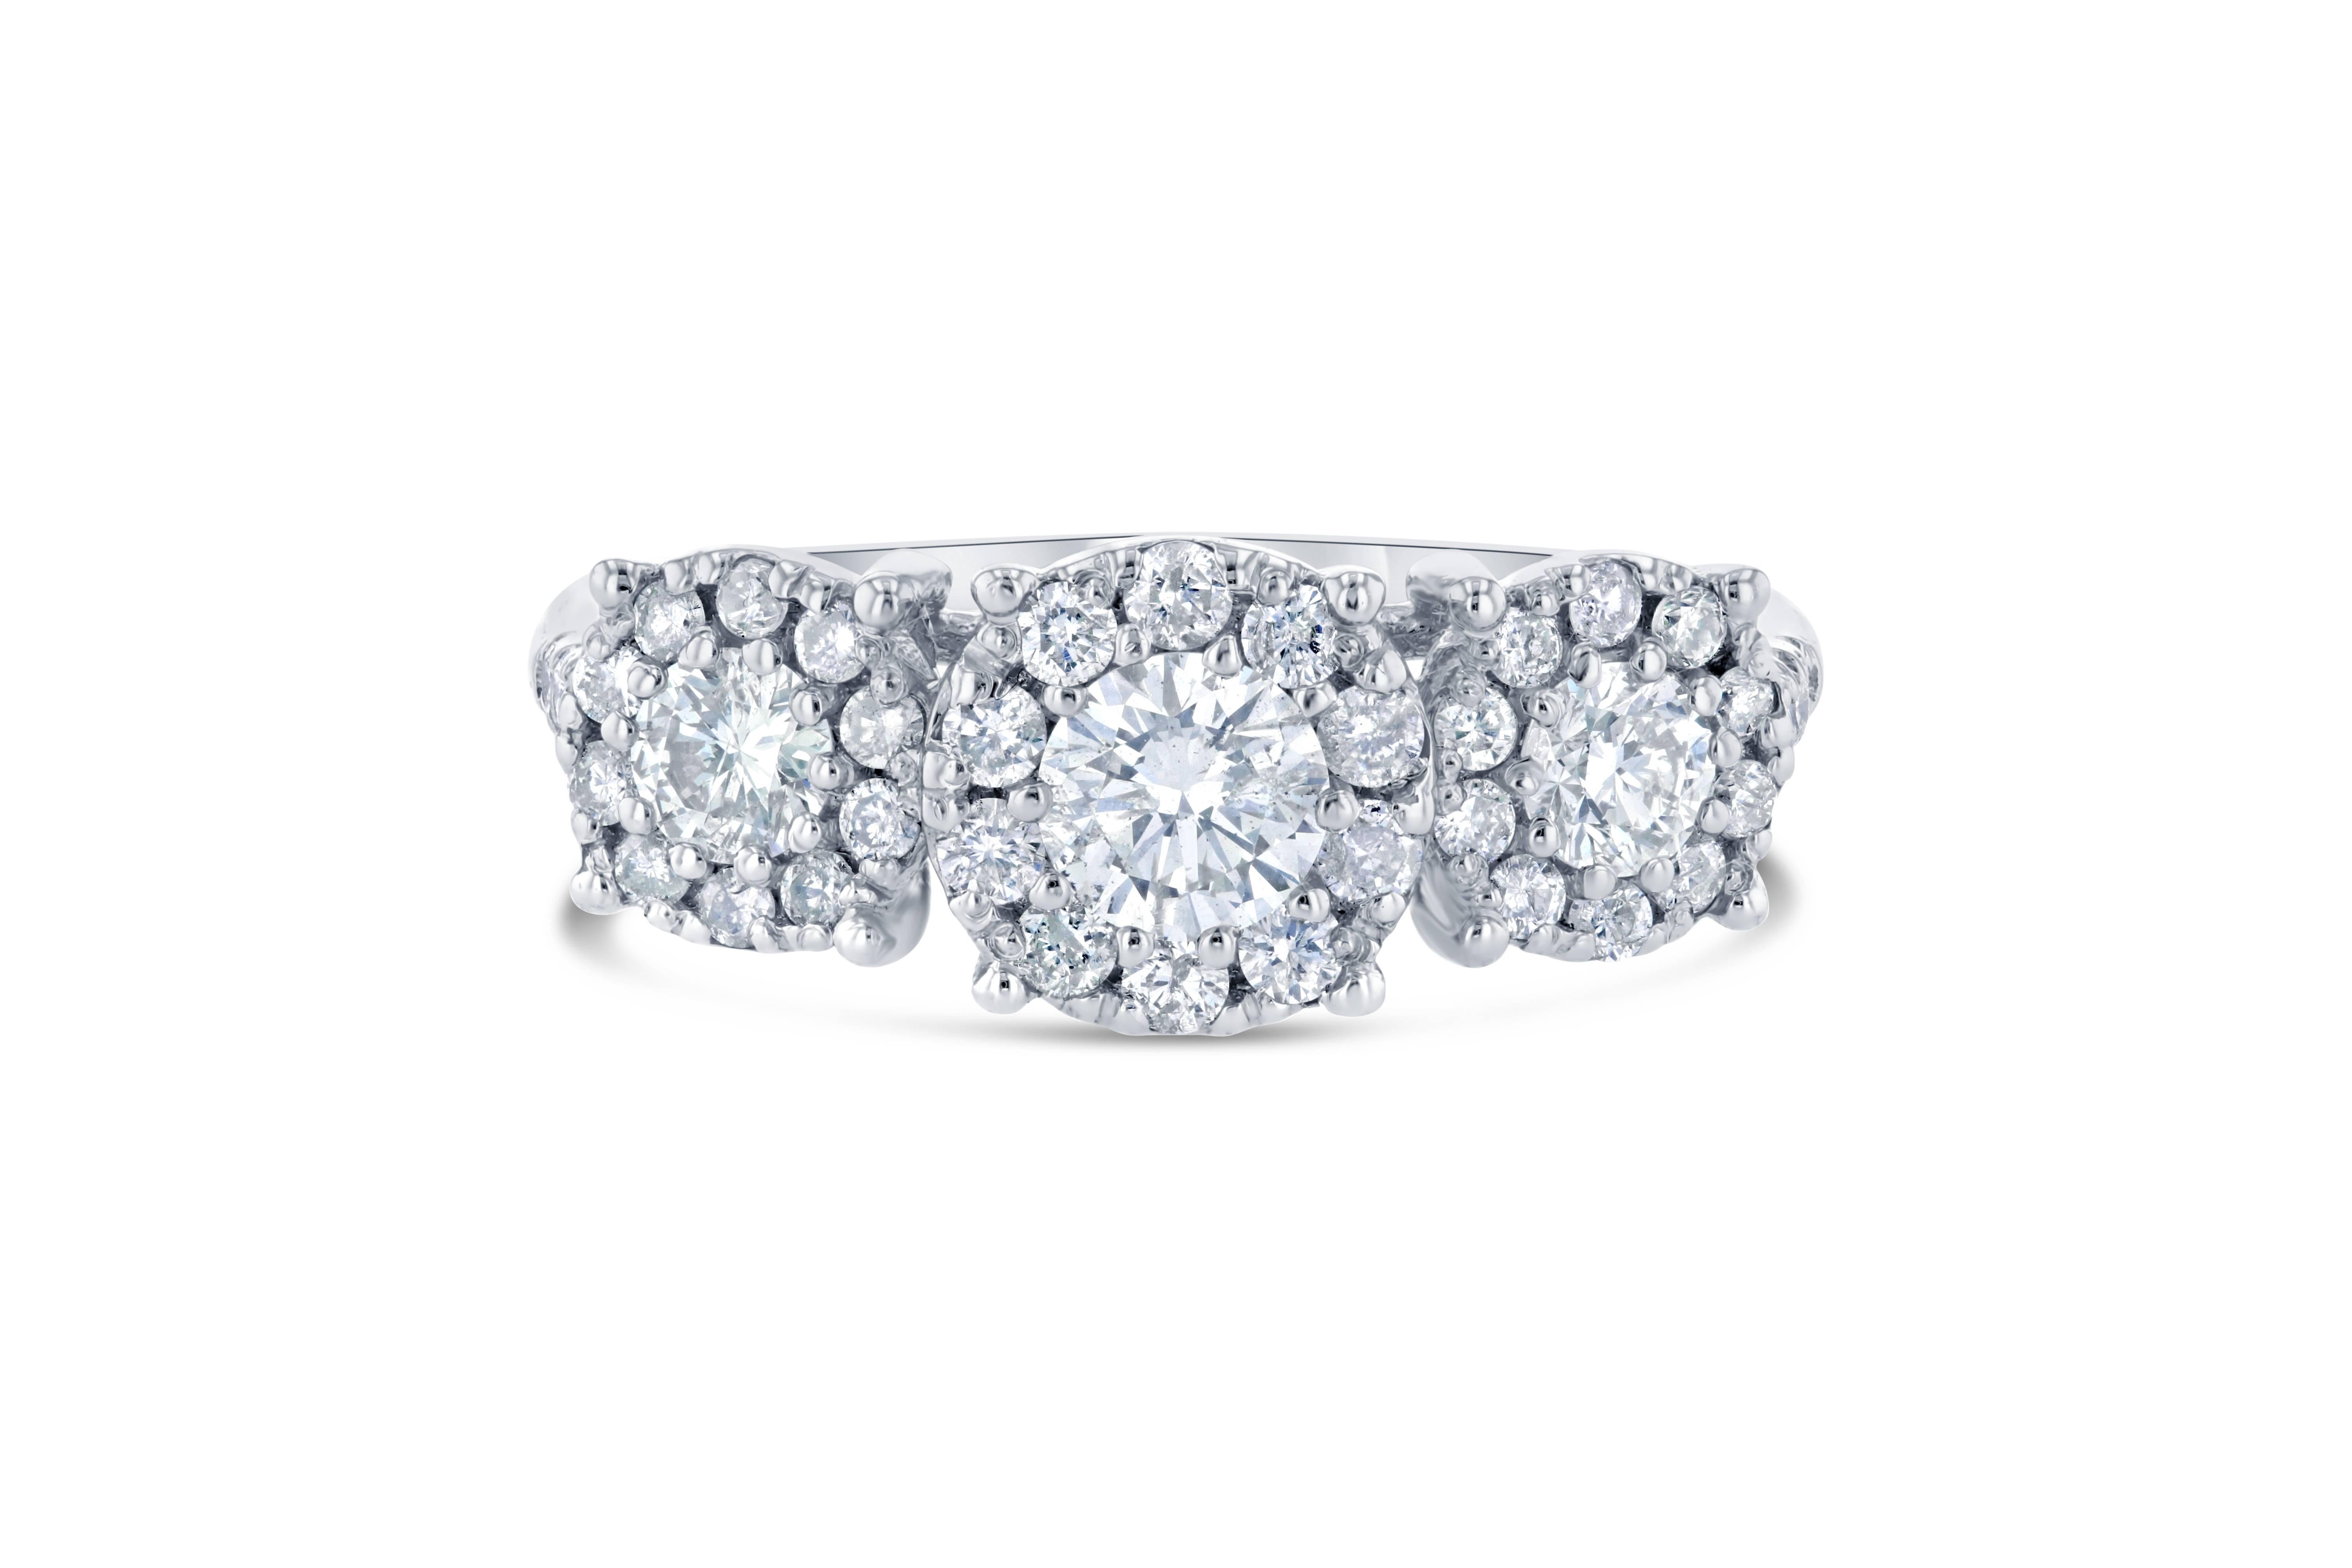 A beautiful round cut diamond three stone ring set in a round invisible setting creating a larger look for the entire ring!

There are 3 Round Cut Diamonds that weigh 0.73 Carats surrounded by 36 Round Cut Diamonds weighing 0.50 Carats. The total